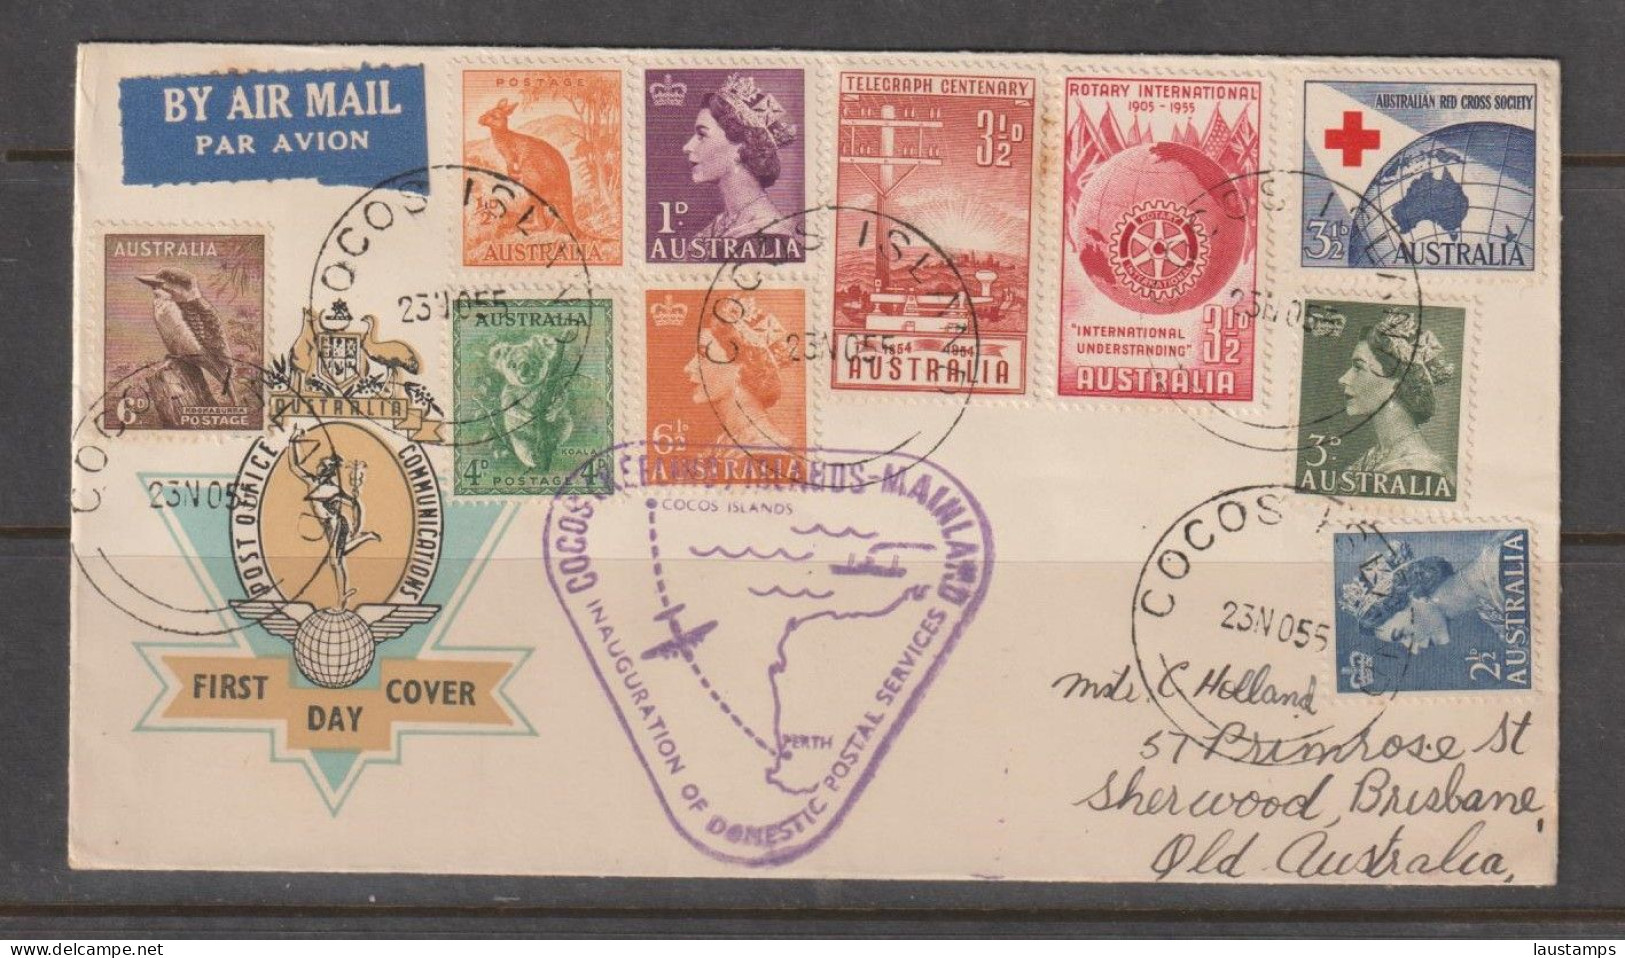 Cocos (Keeling) Islands First Day Transfered To Australia Administration Cover(Dated 23 Nov 55) - Kokosinseln (Keeling Islands)